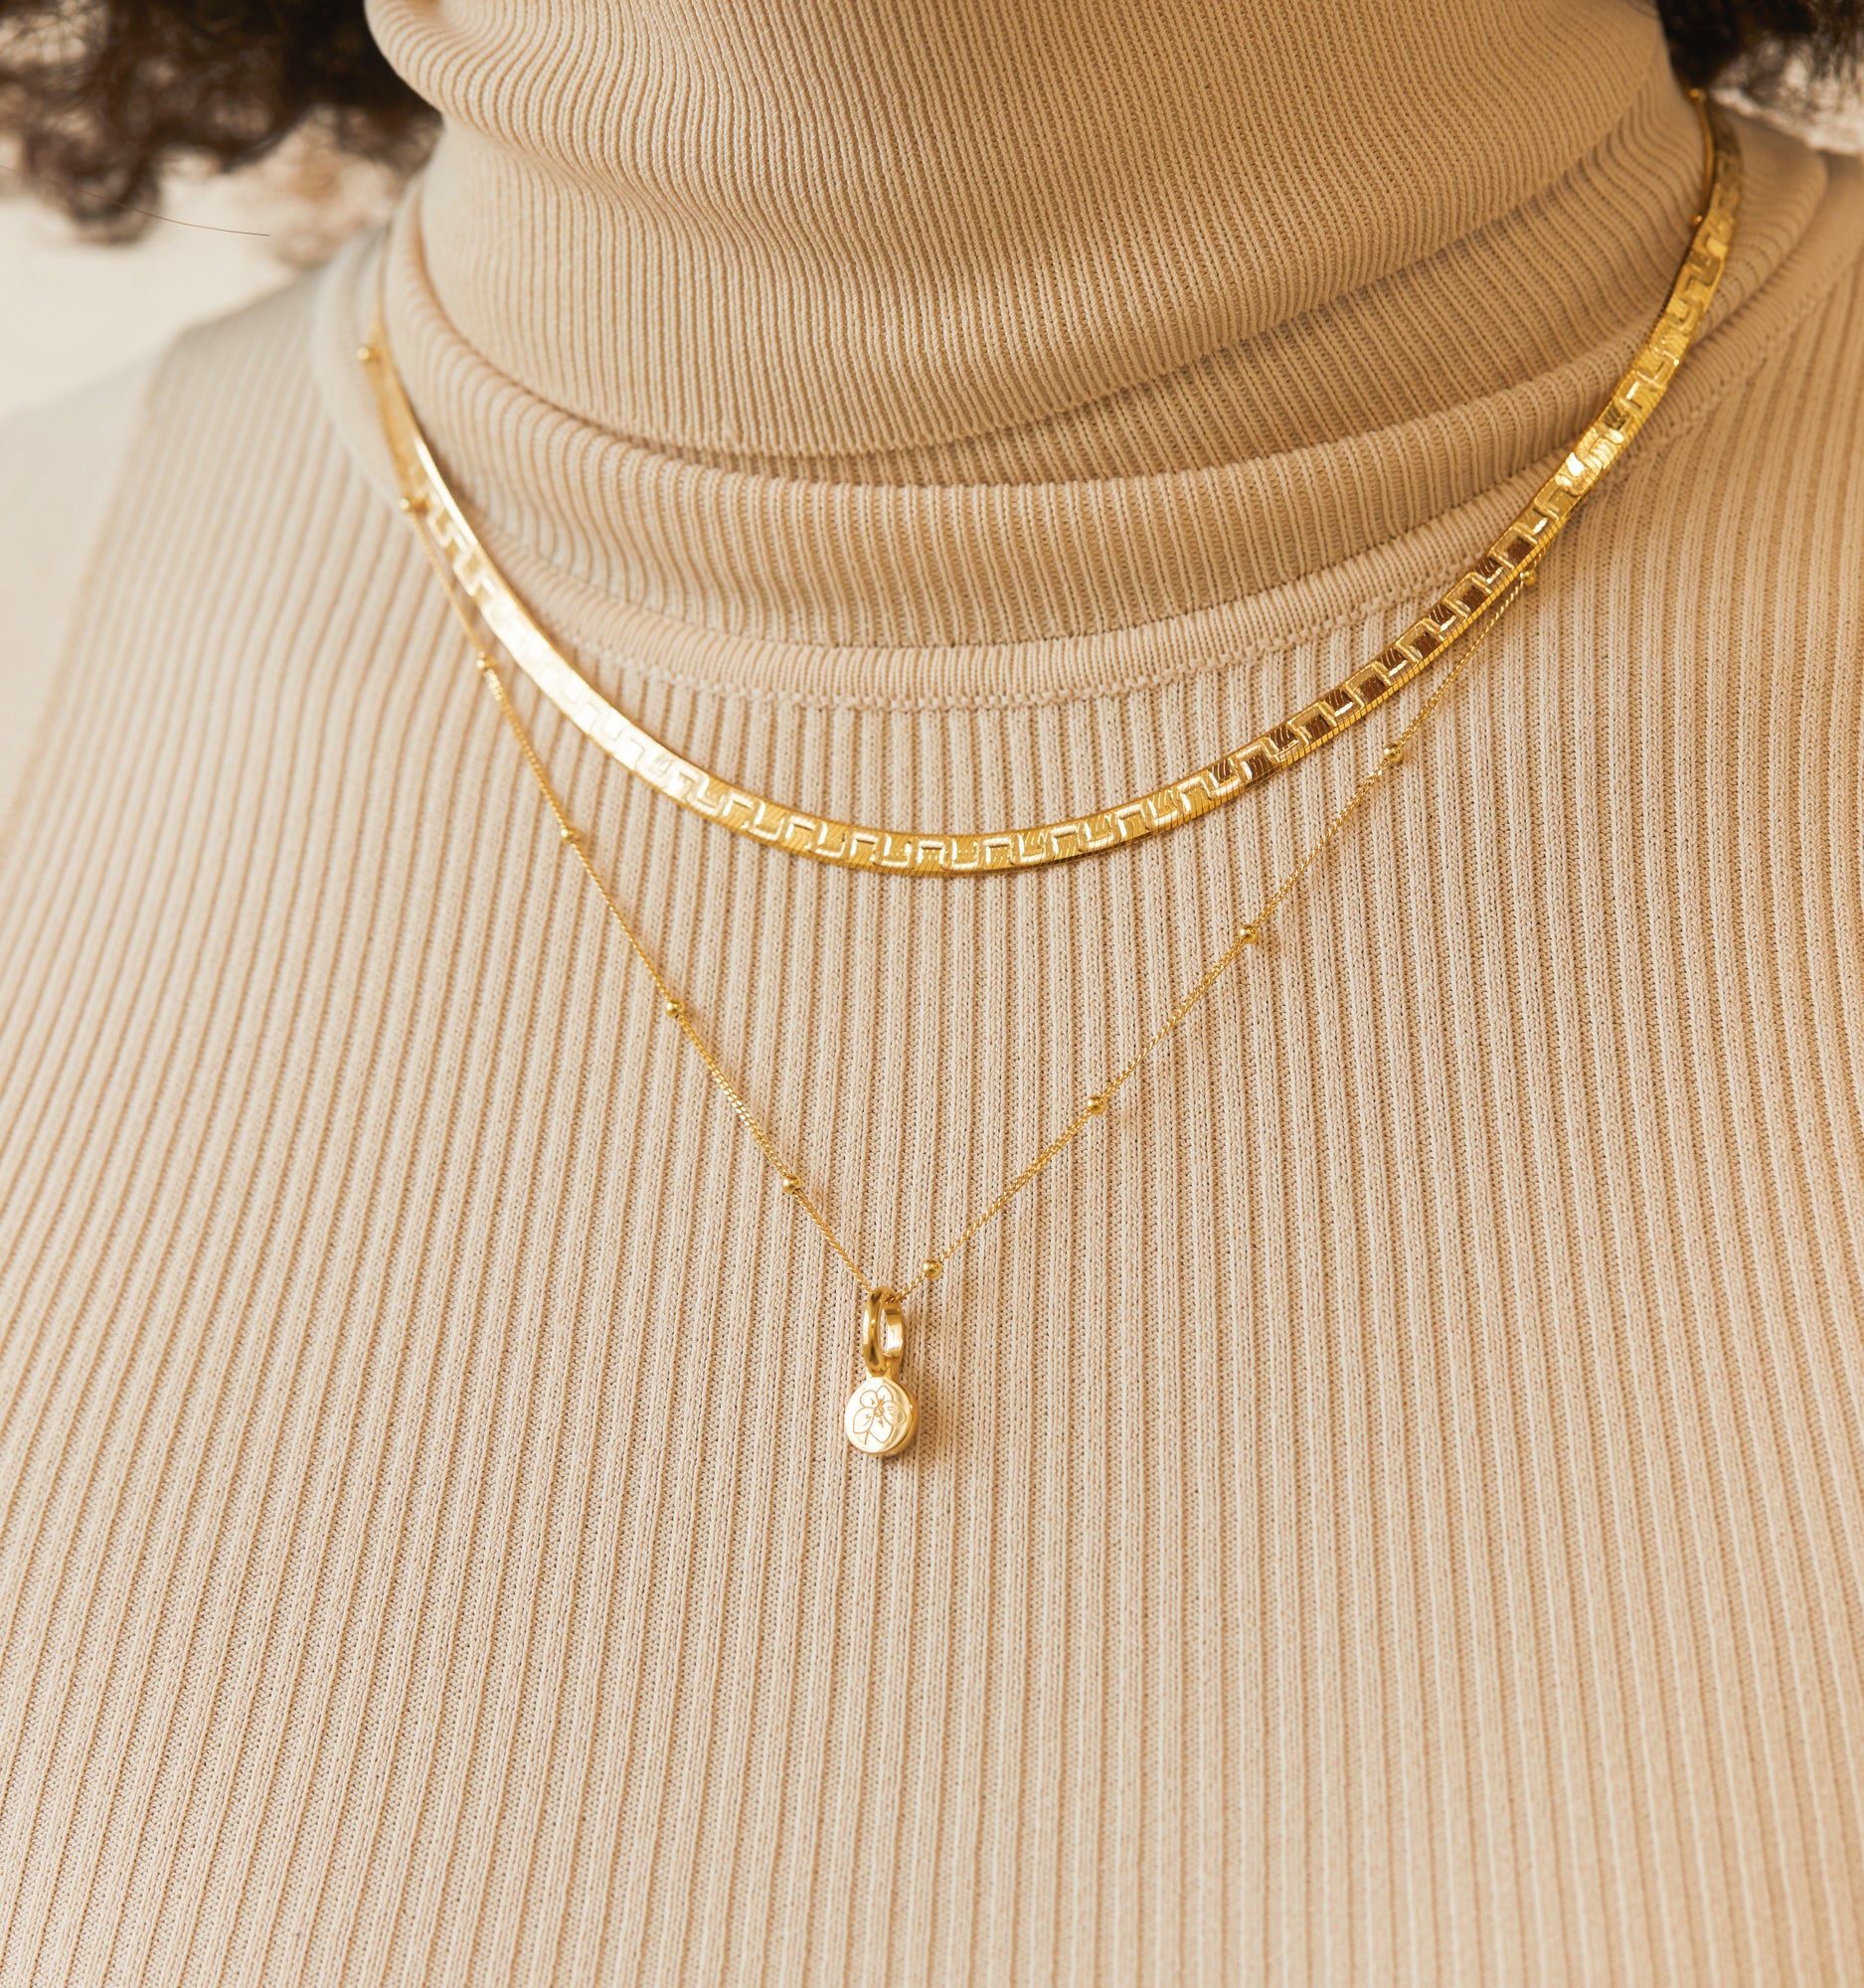 chanel necklace 14k gold